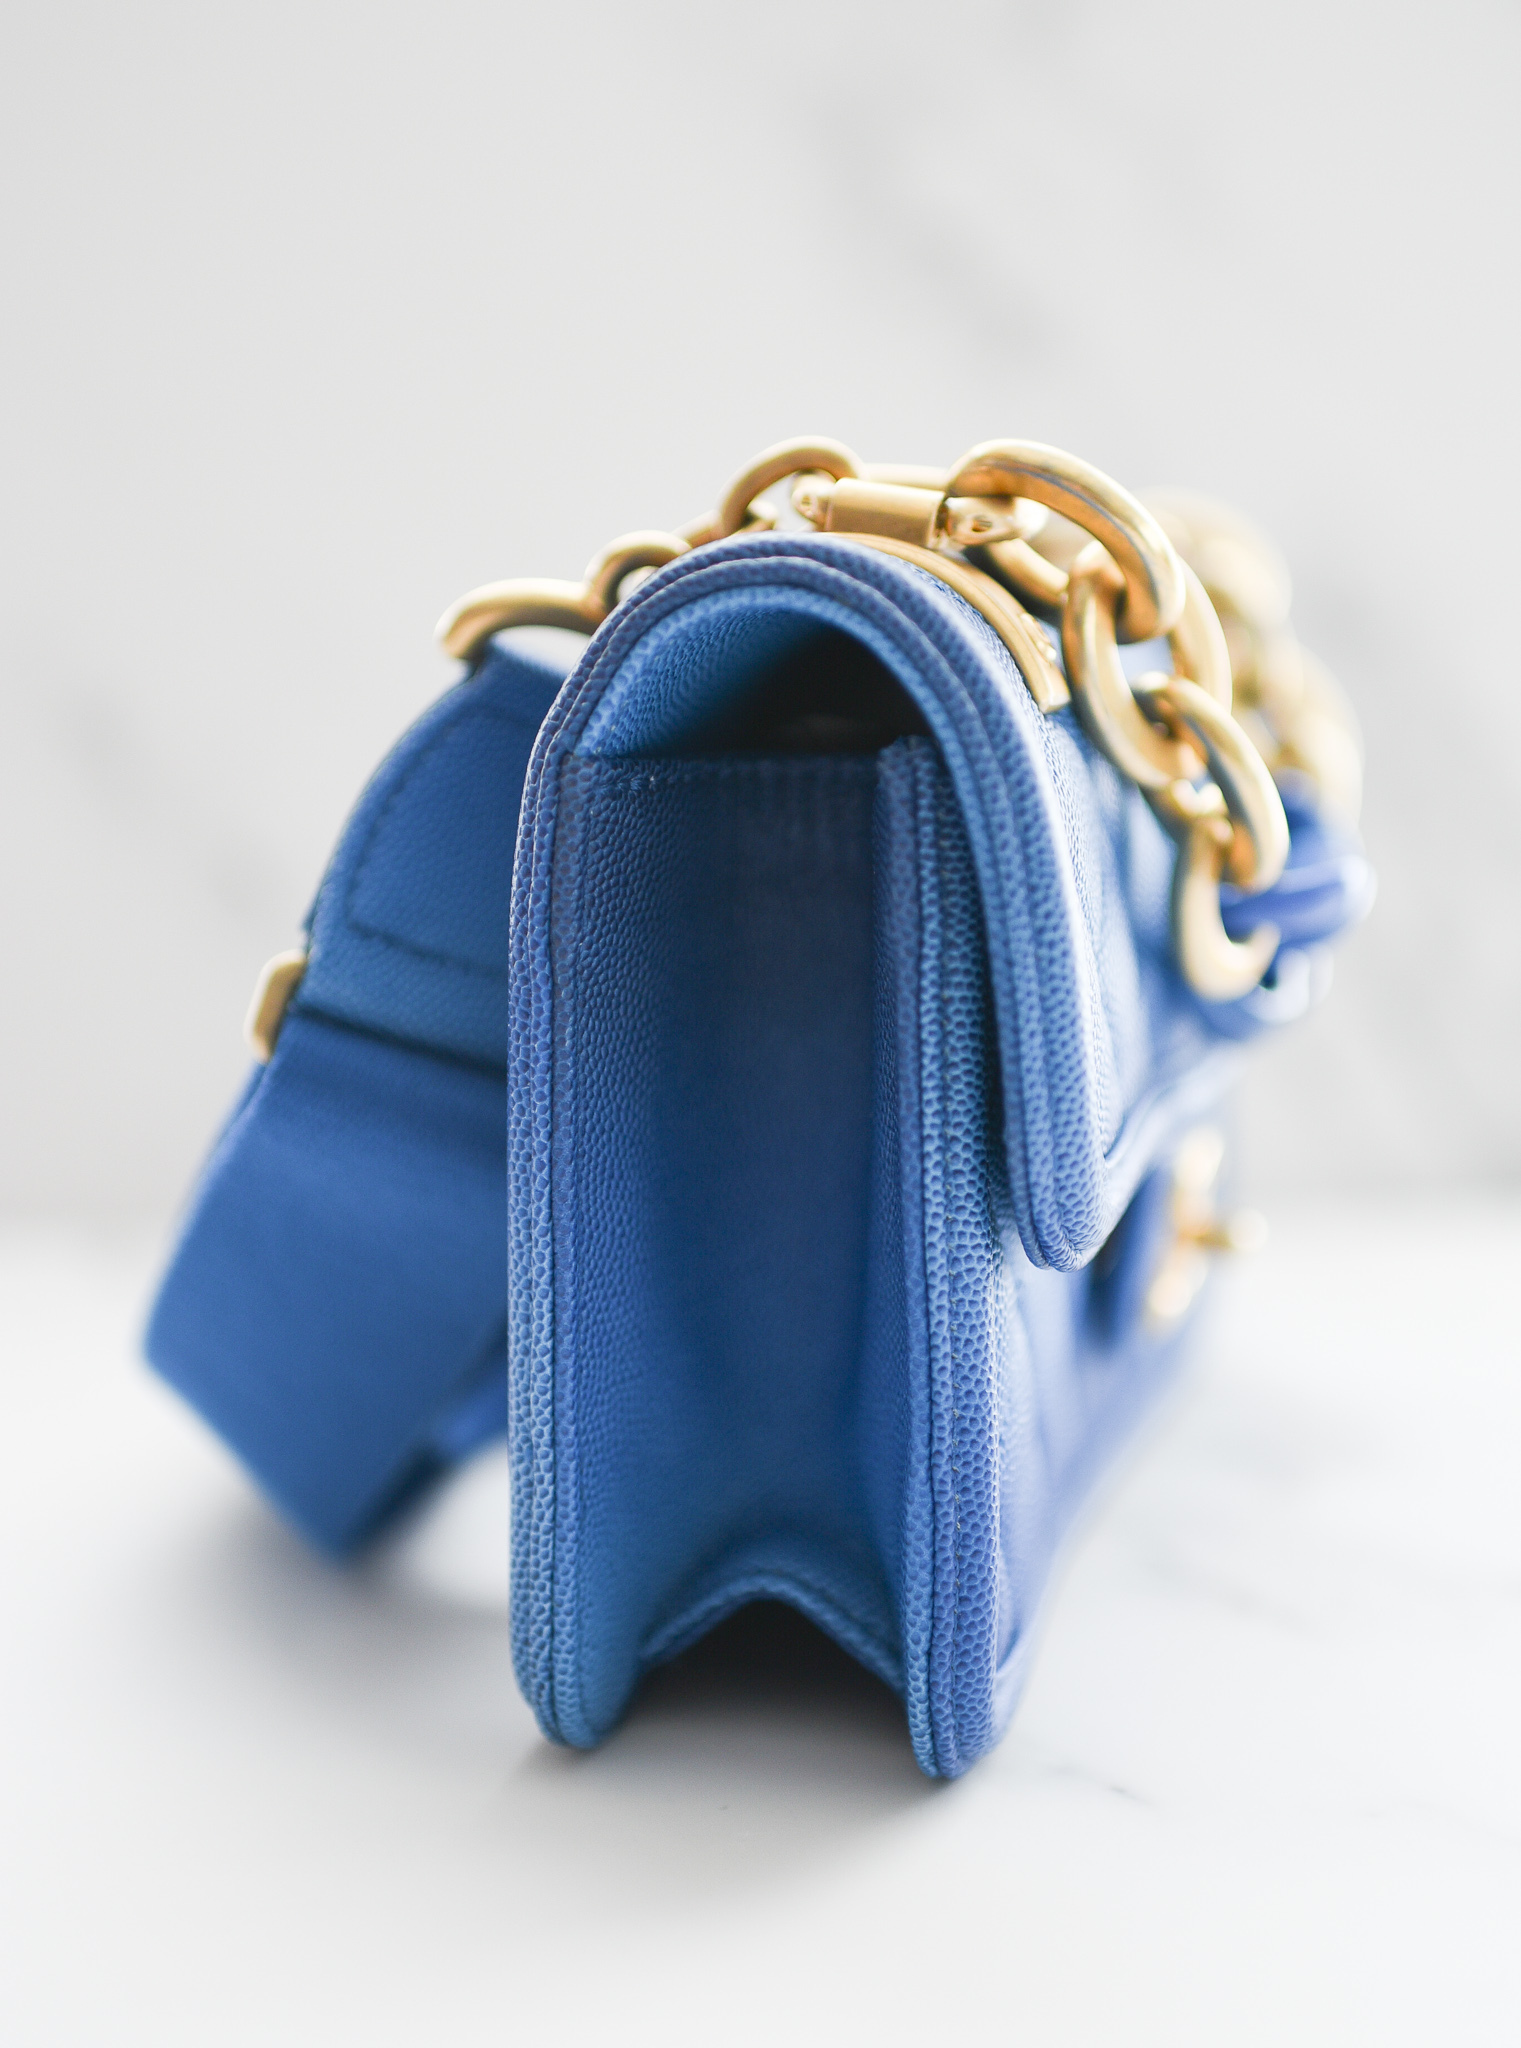 Chanel Sunset by the Sea Bag, Blue Ombre Caviar with Gold Hardware